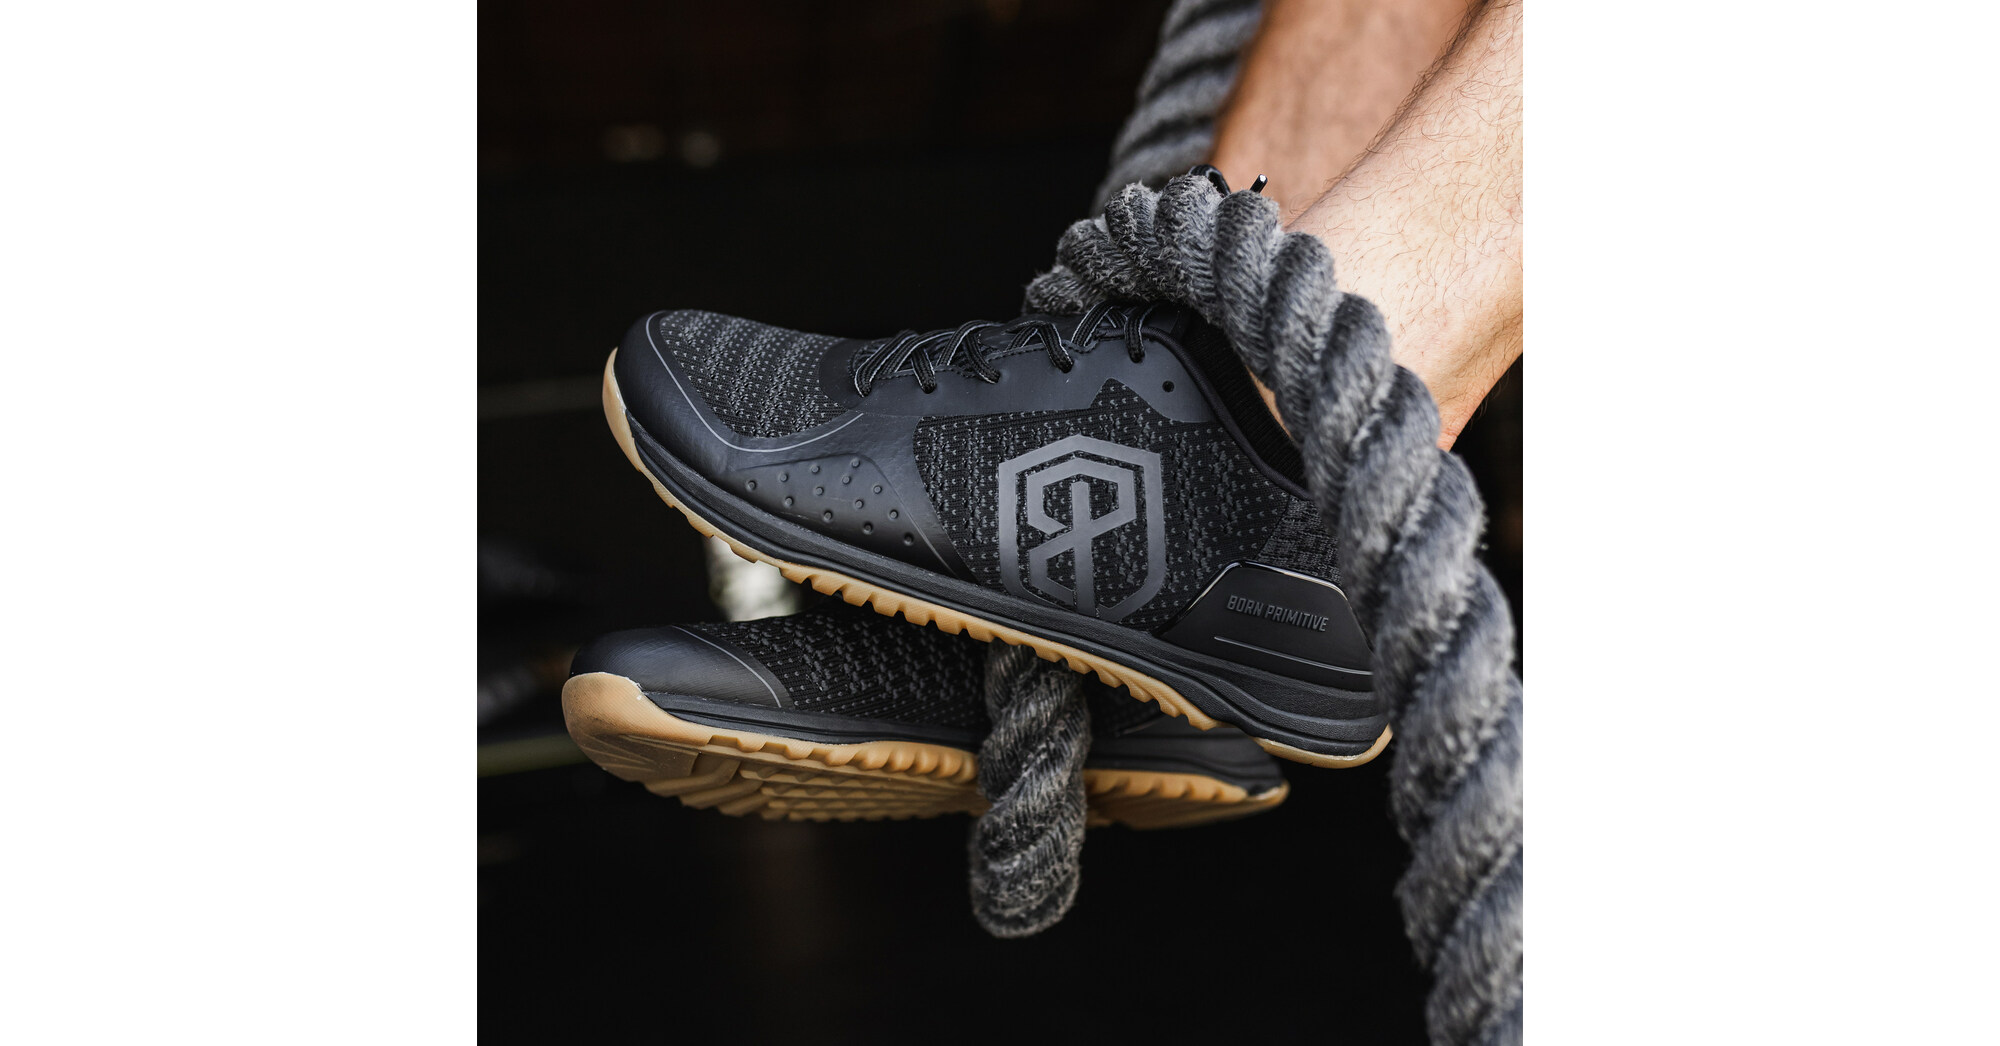 Born Primitive Launches Its First Performance Shoe With Its 'Savage 1' -  Muscle & Fitness